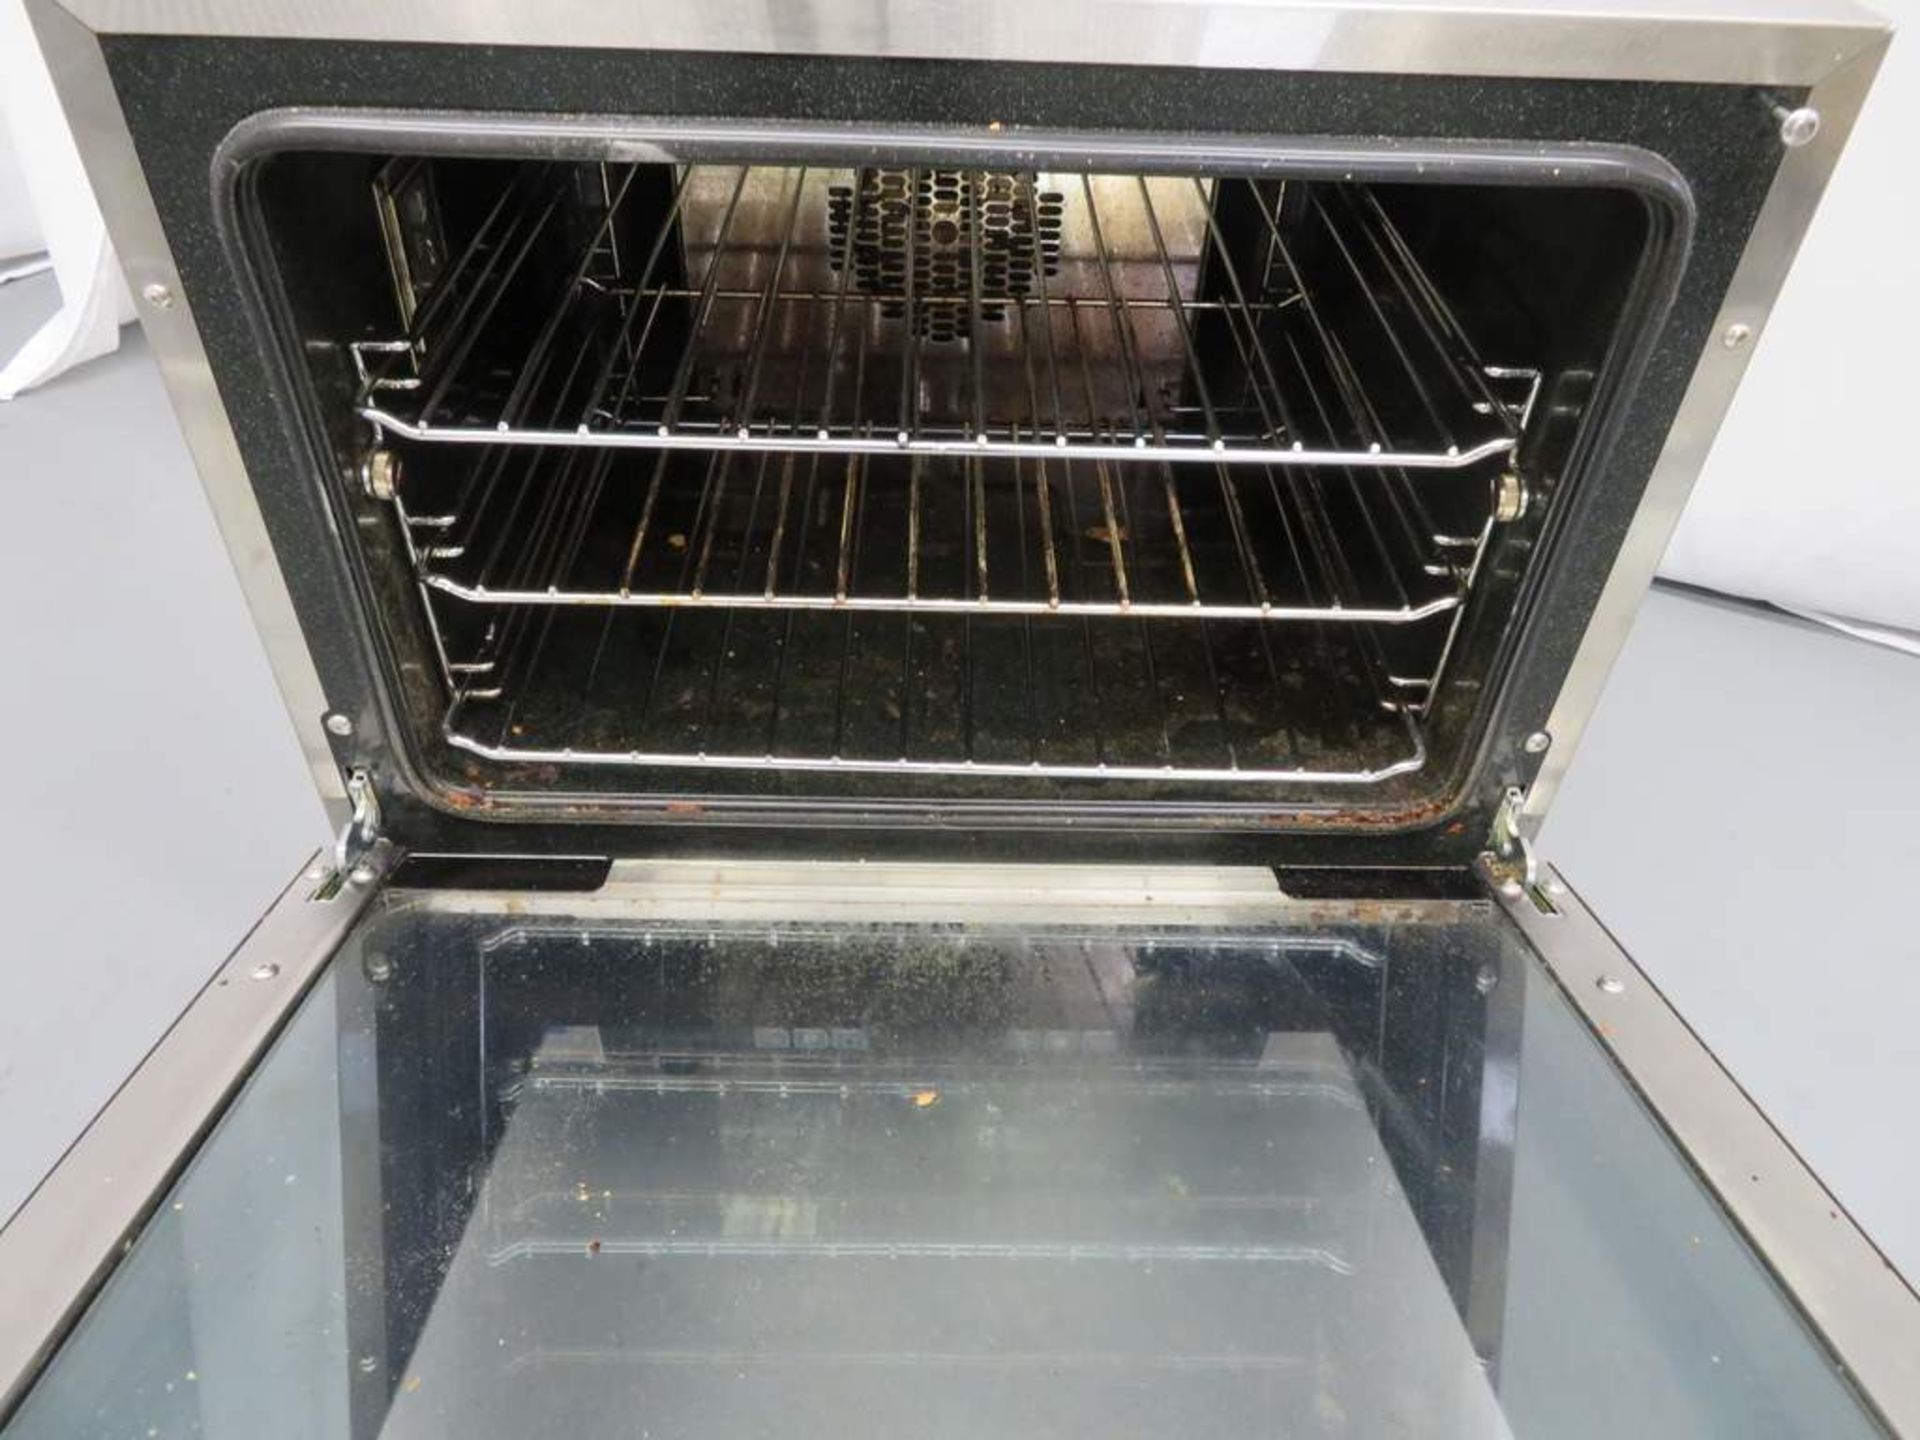 Blueseal CP994 Digital Electric Convection Oven. - Image 5 of 7